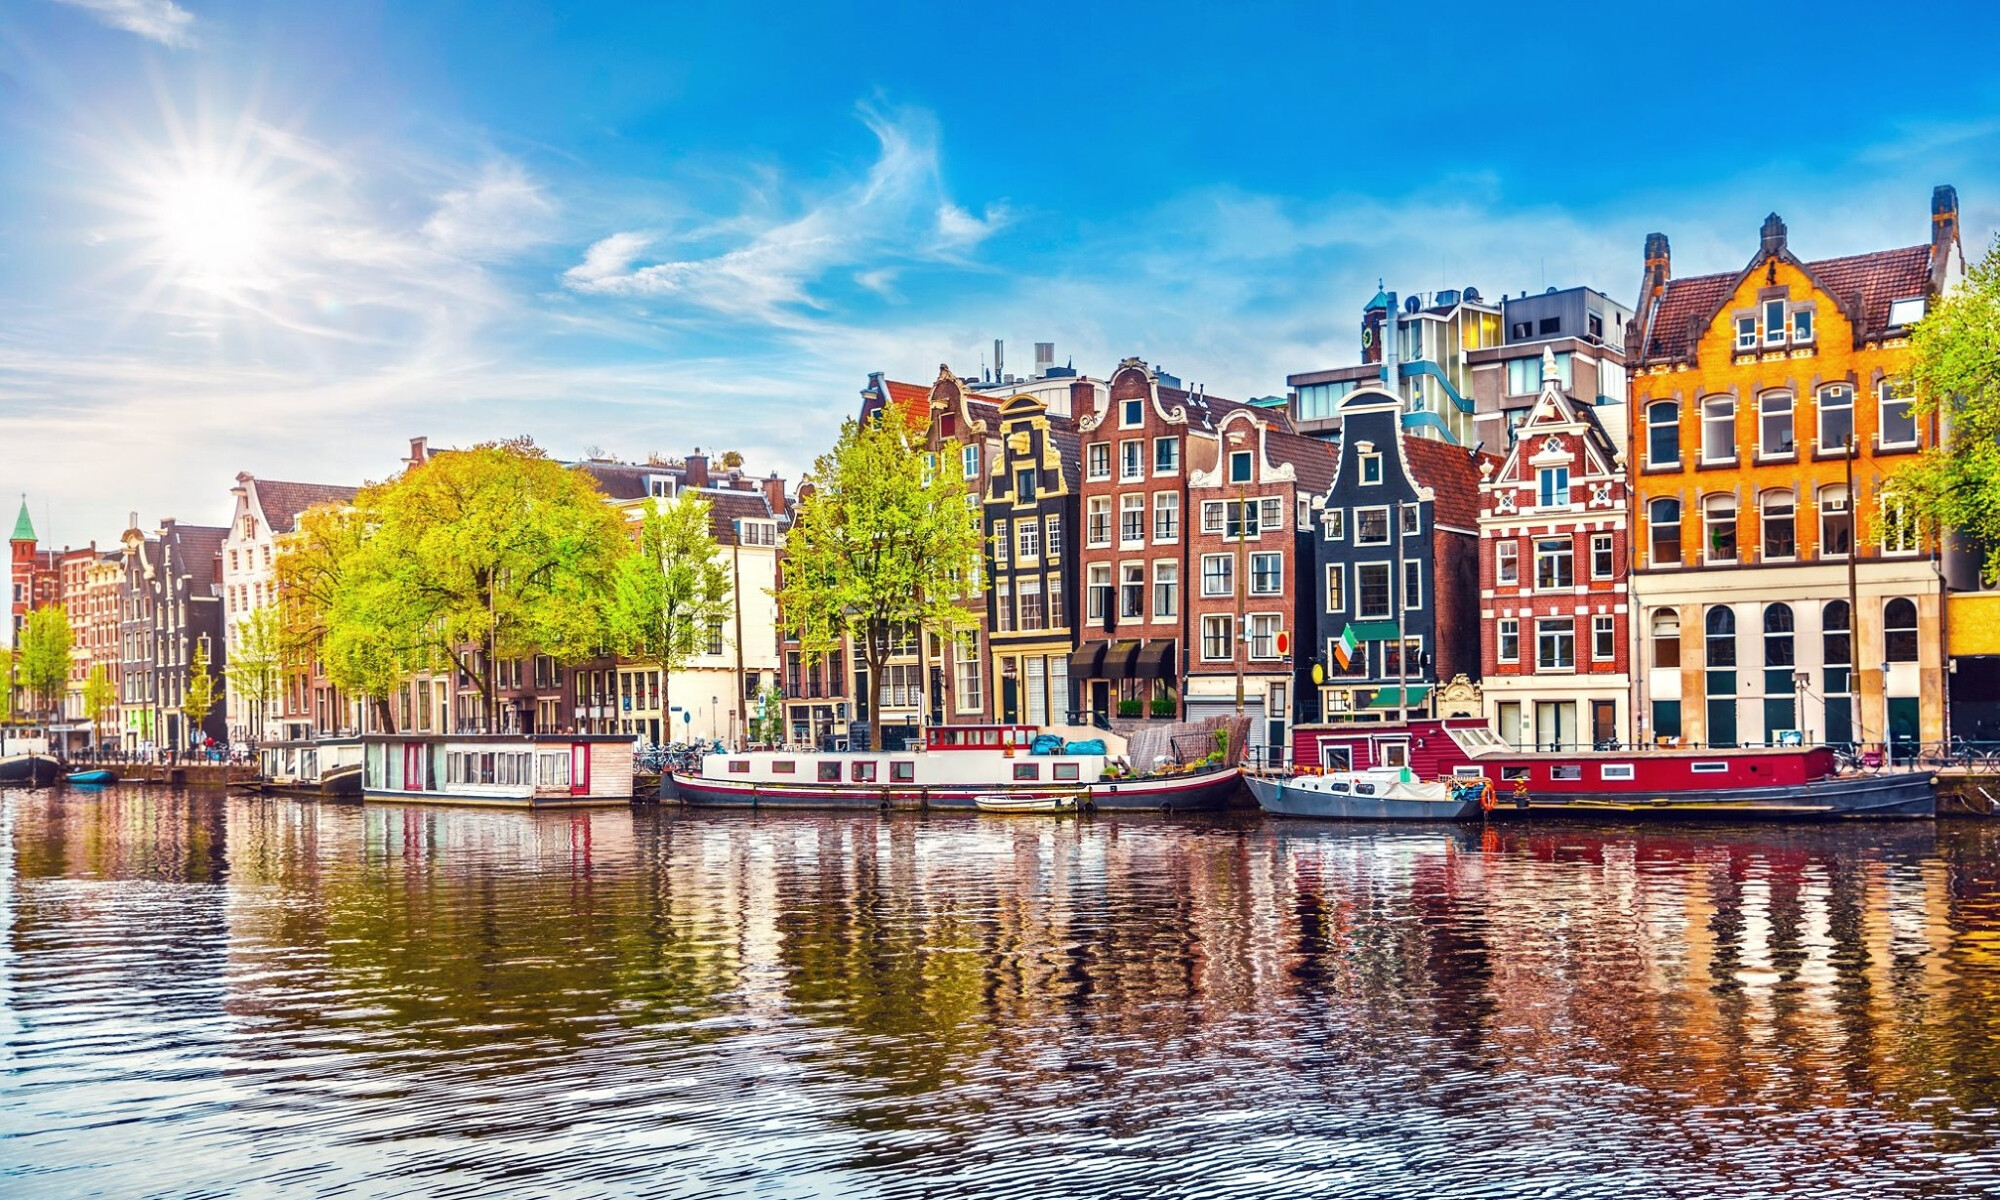 commercetools has a new presence in Amsterdam